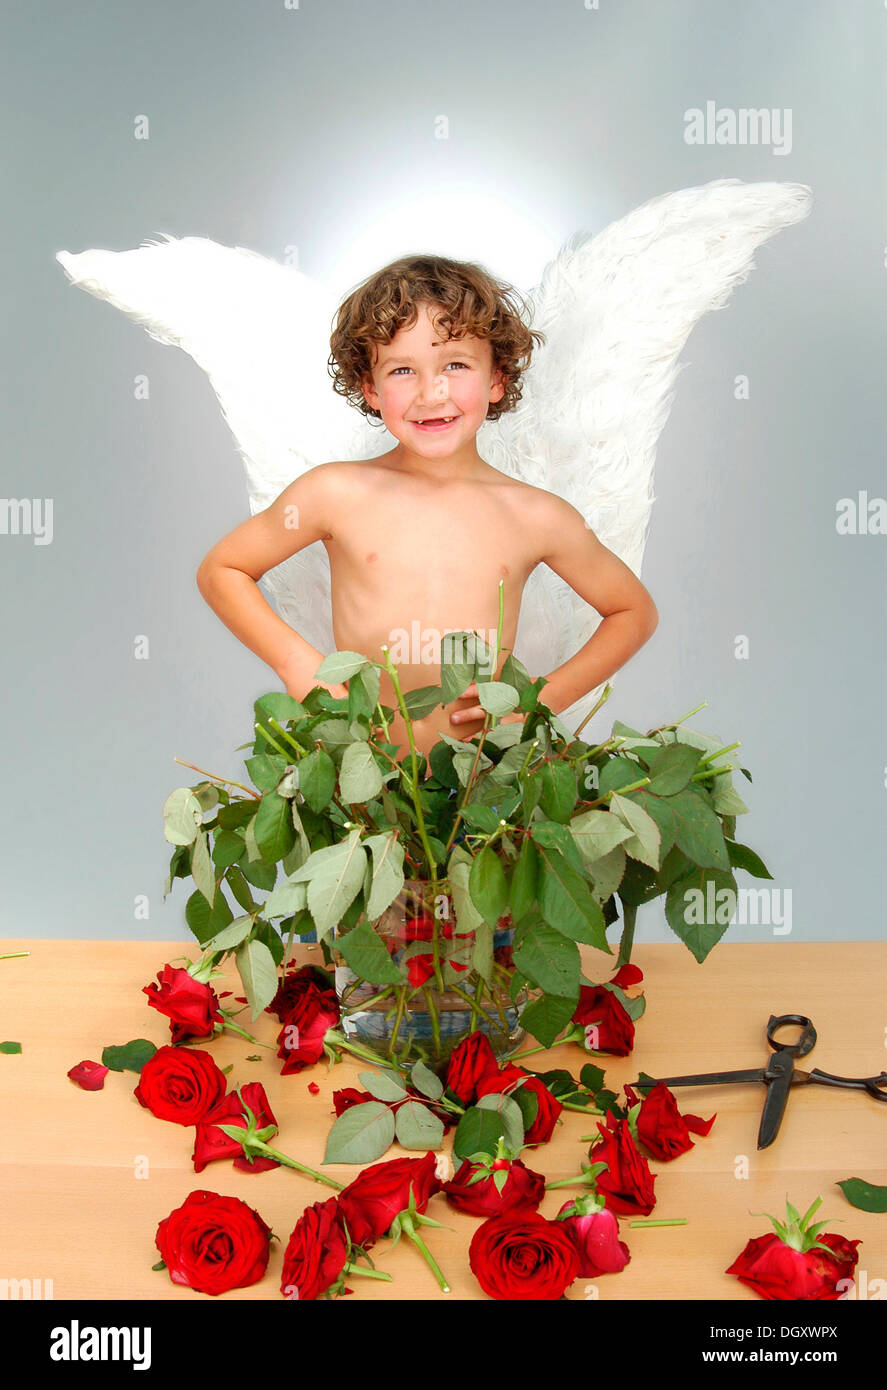 Boy with angel wings, after cutting the heads off a bouquet of roses with a large pair of scissors Stock Photo